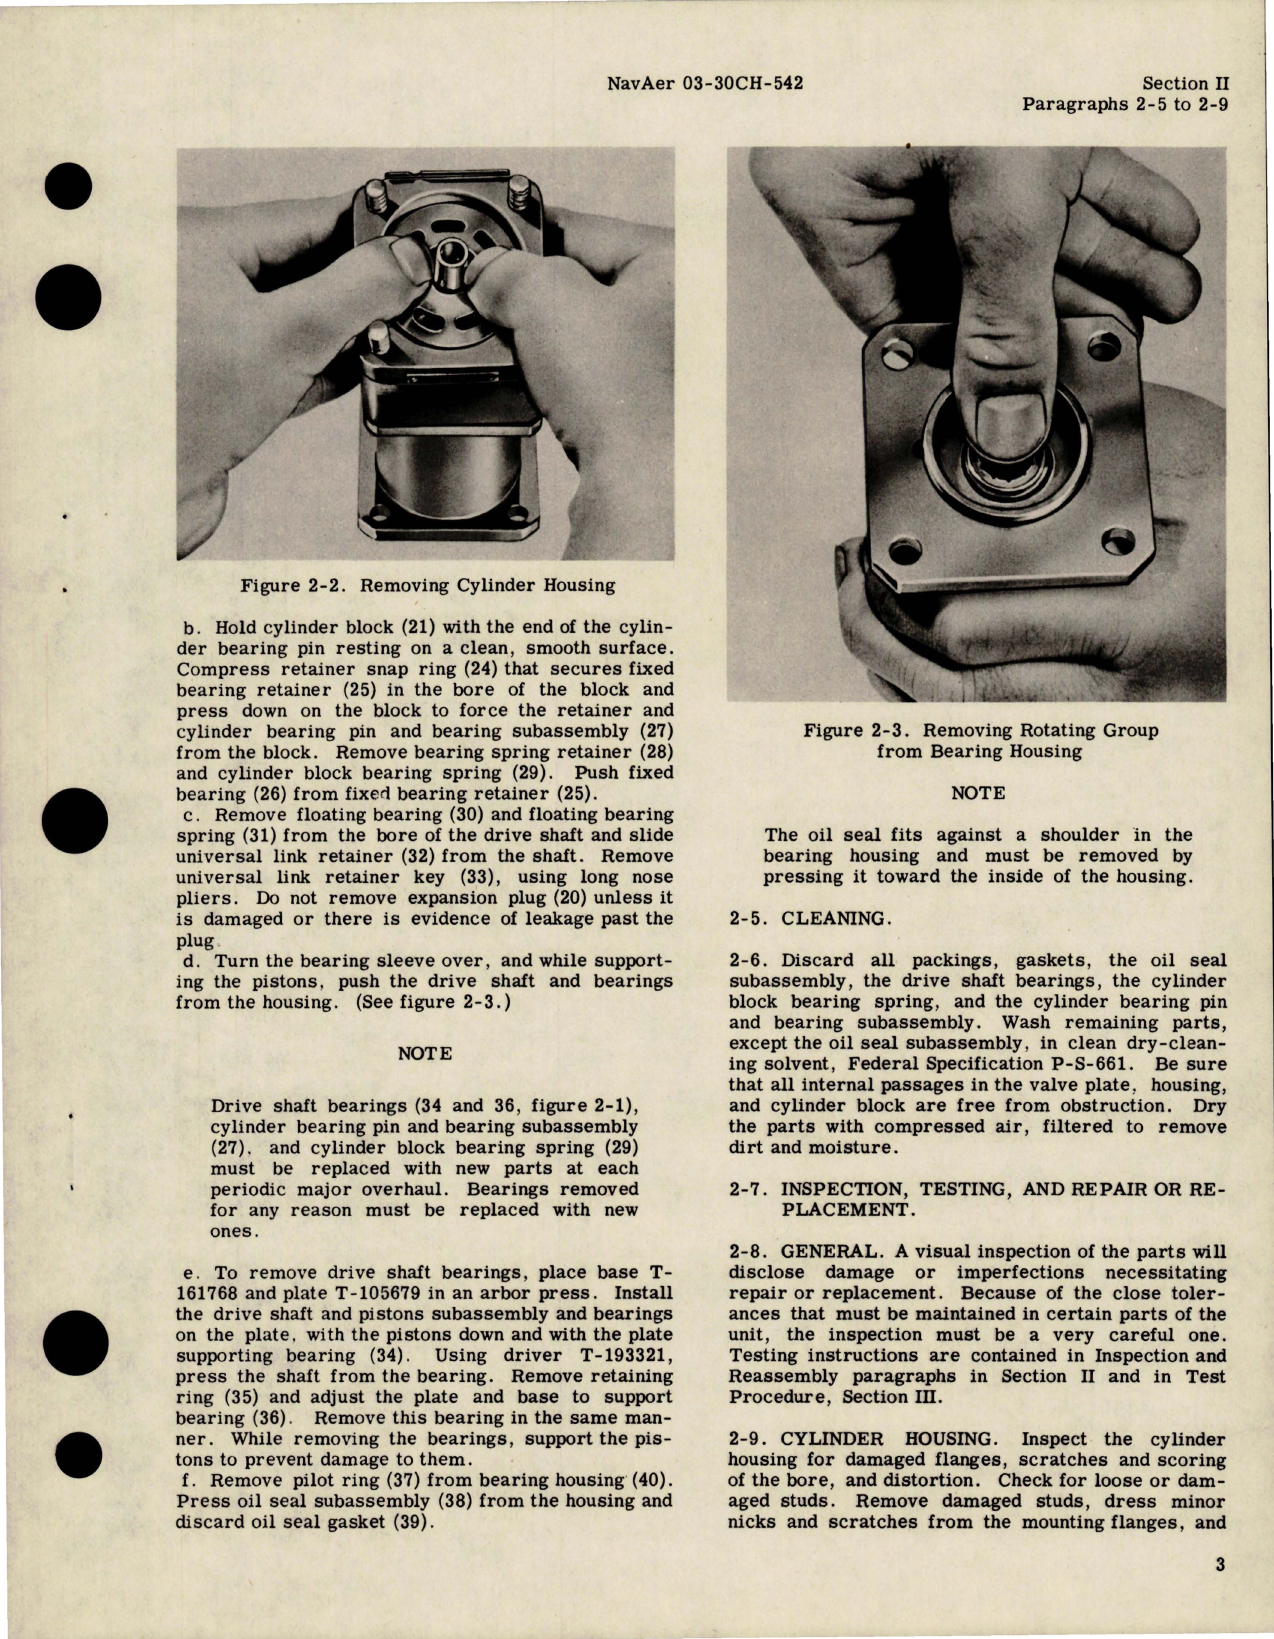 Sample page 7 from AirCorps Library document: Overhaul Instructions for Hydraulic Motor Assemblies